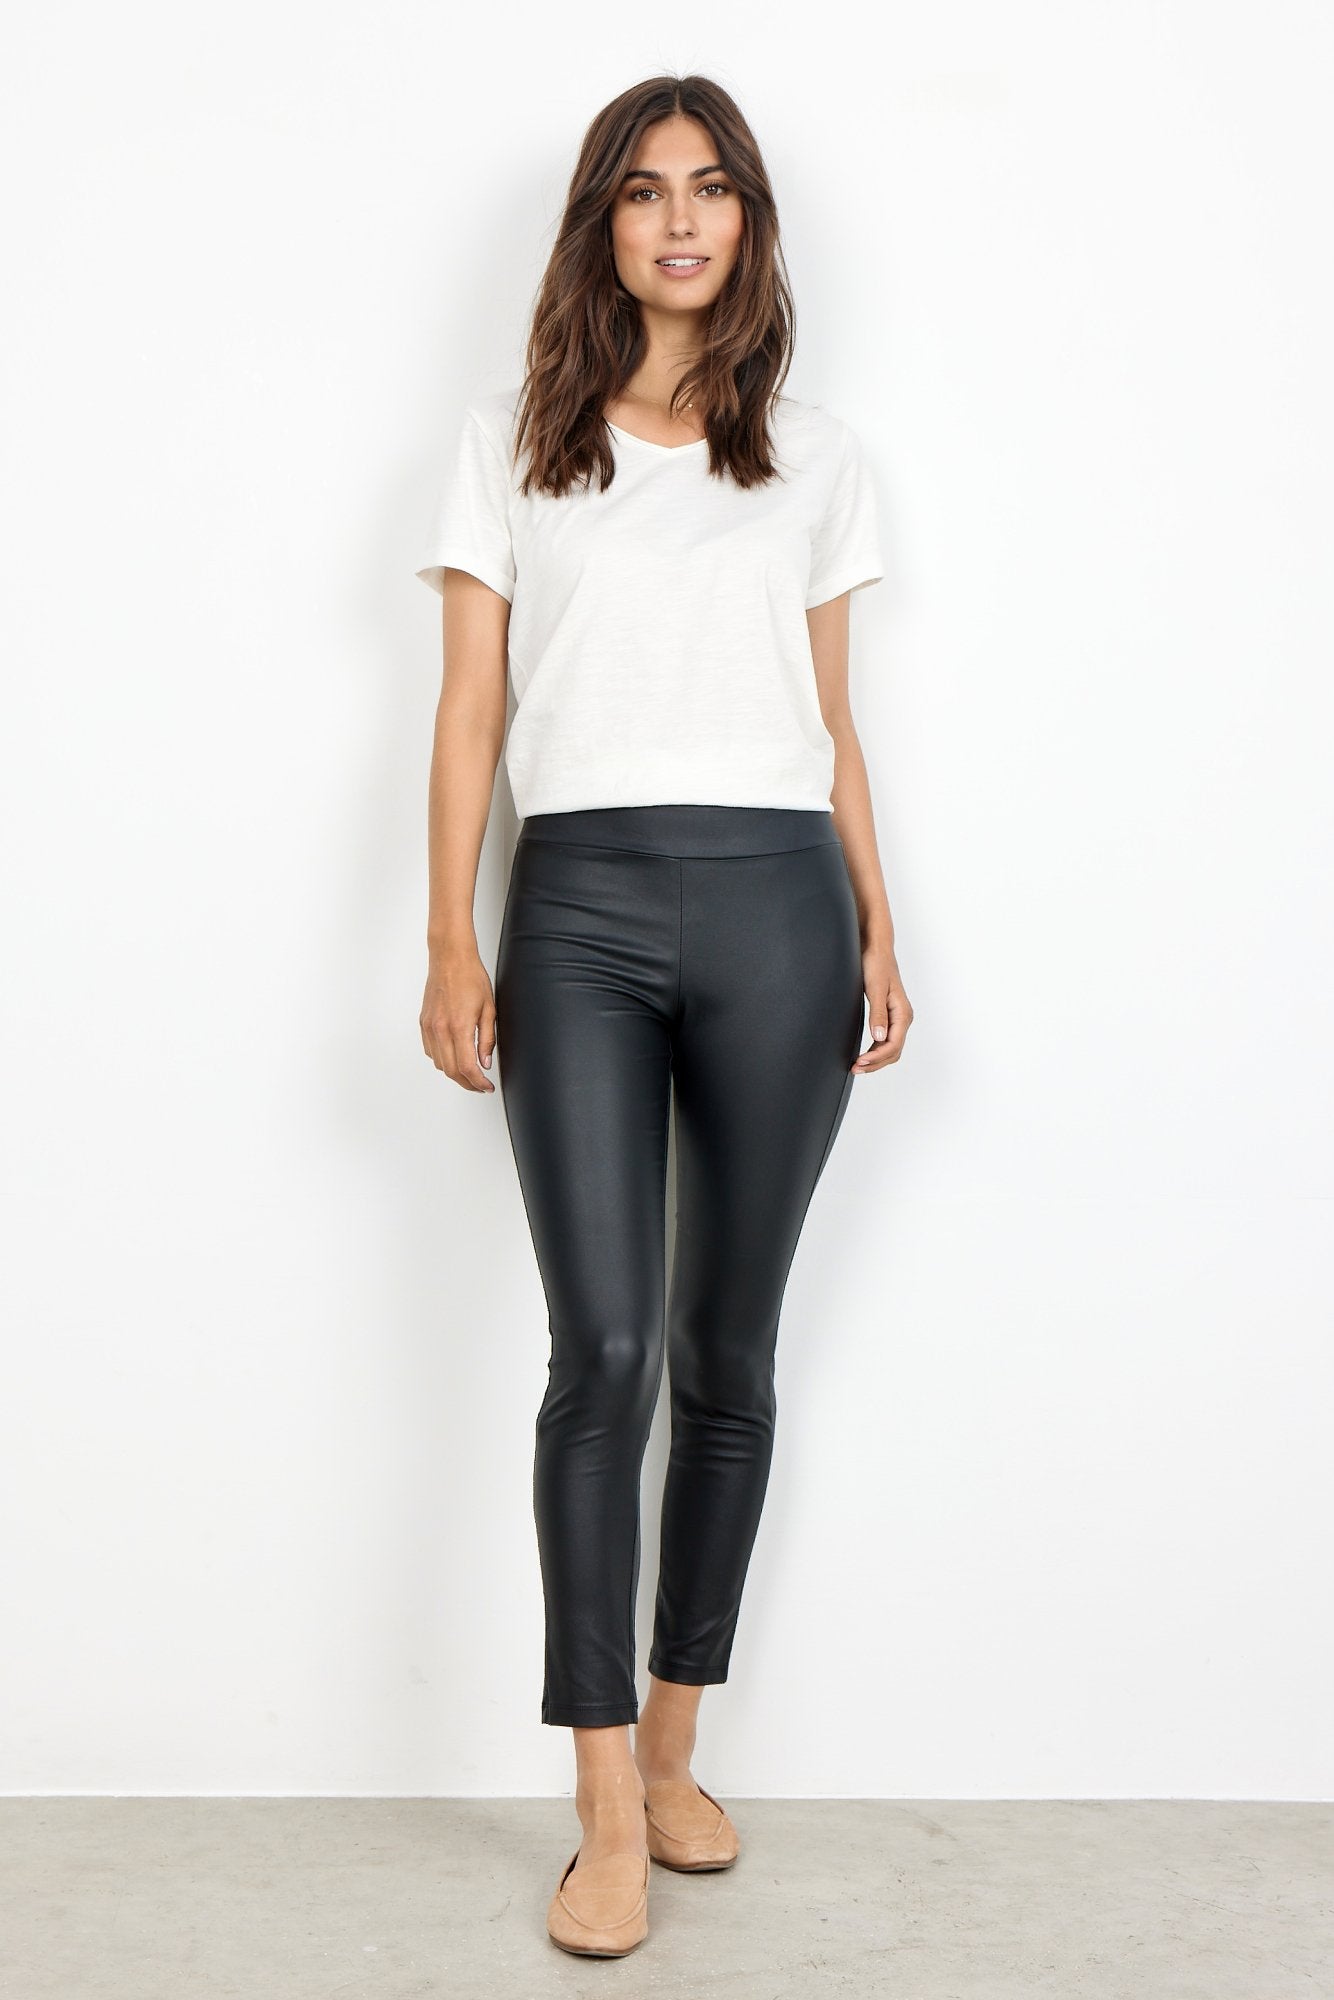 SC-PAM 2-B Pants soyaconcept – | in soyaconcept Soyaconcept Black from